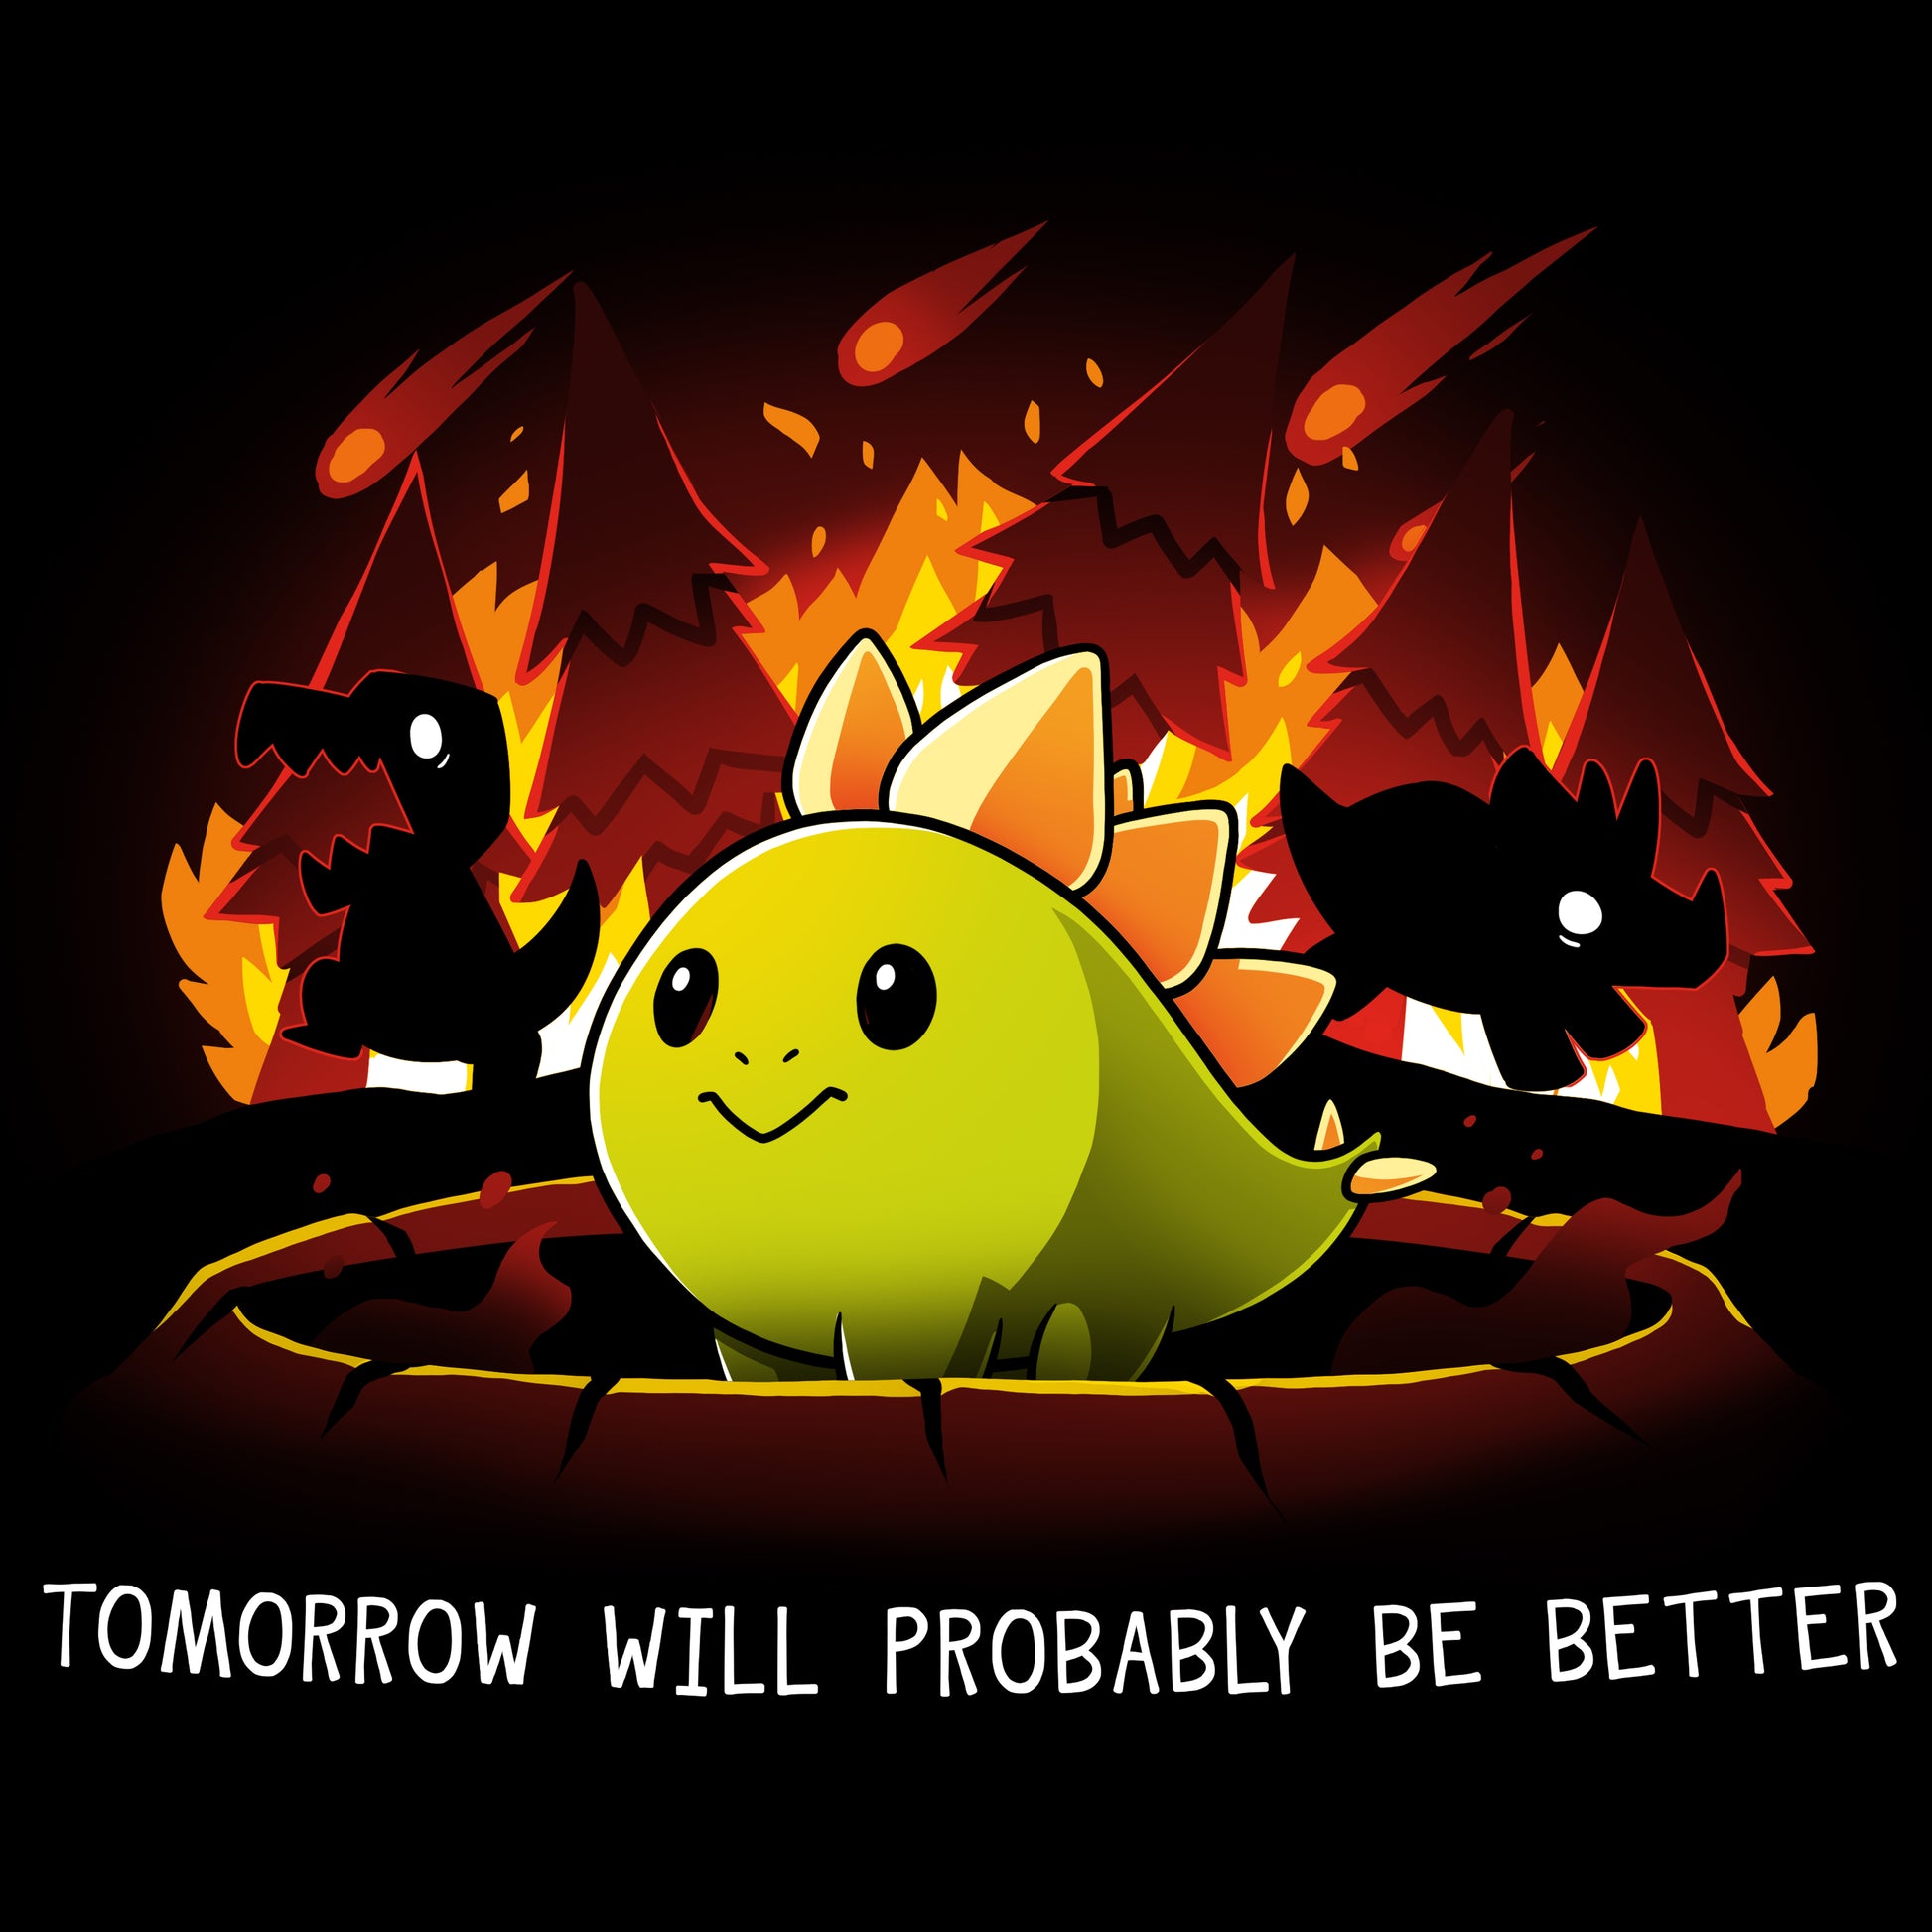 TeeTurtle's product, "Tomorrow Will Probably Be Better," will bring comfort and optimism.